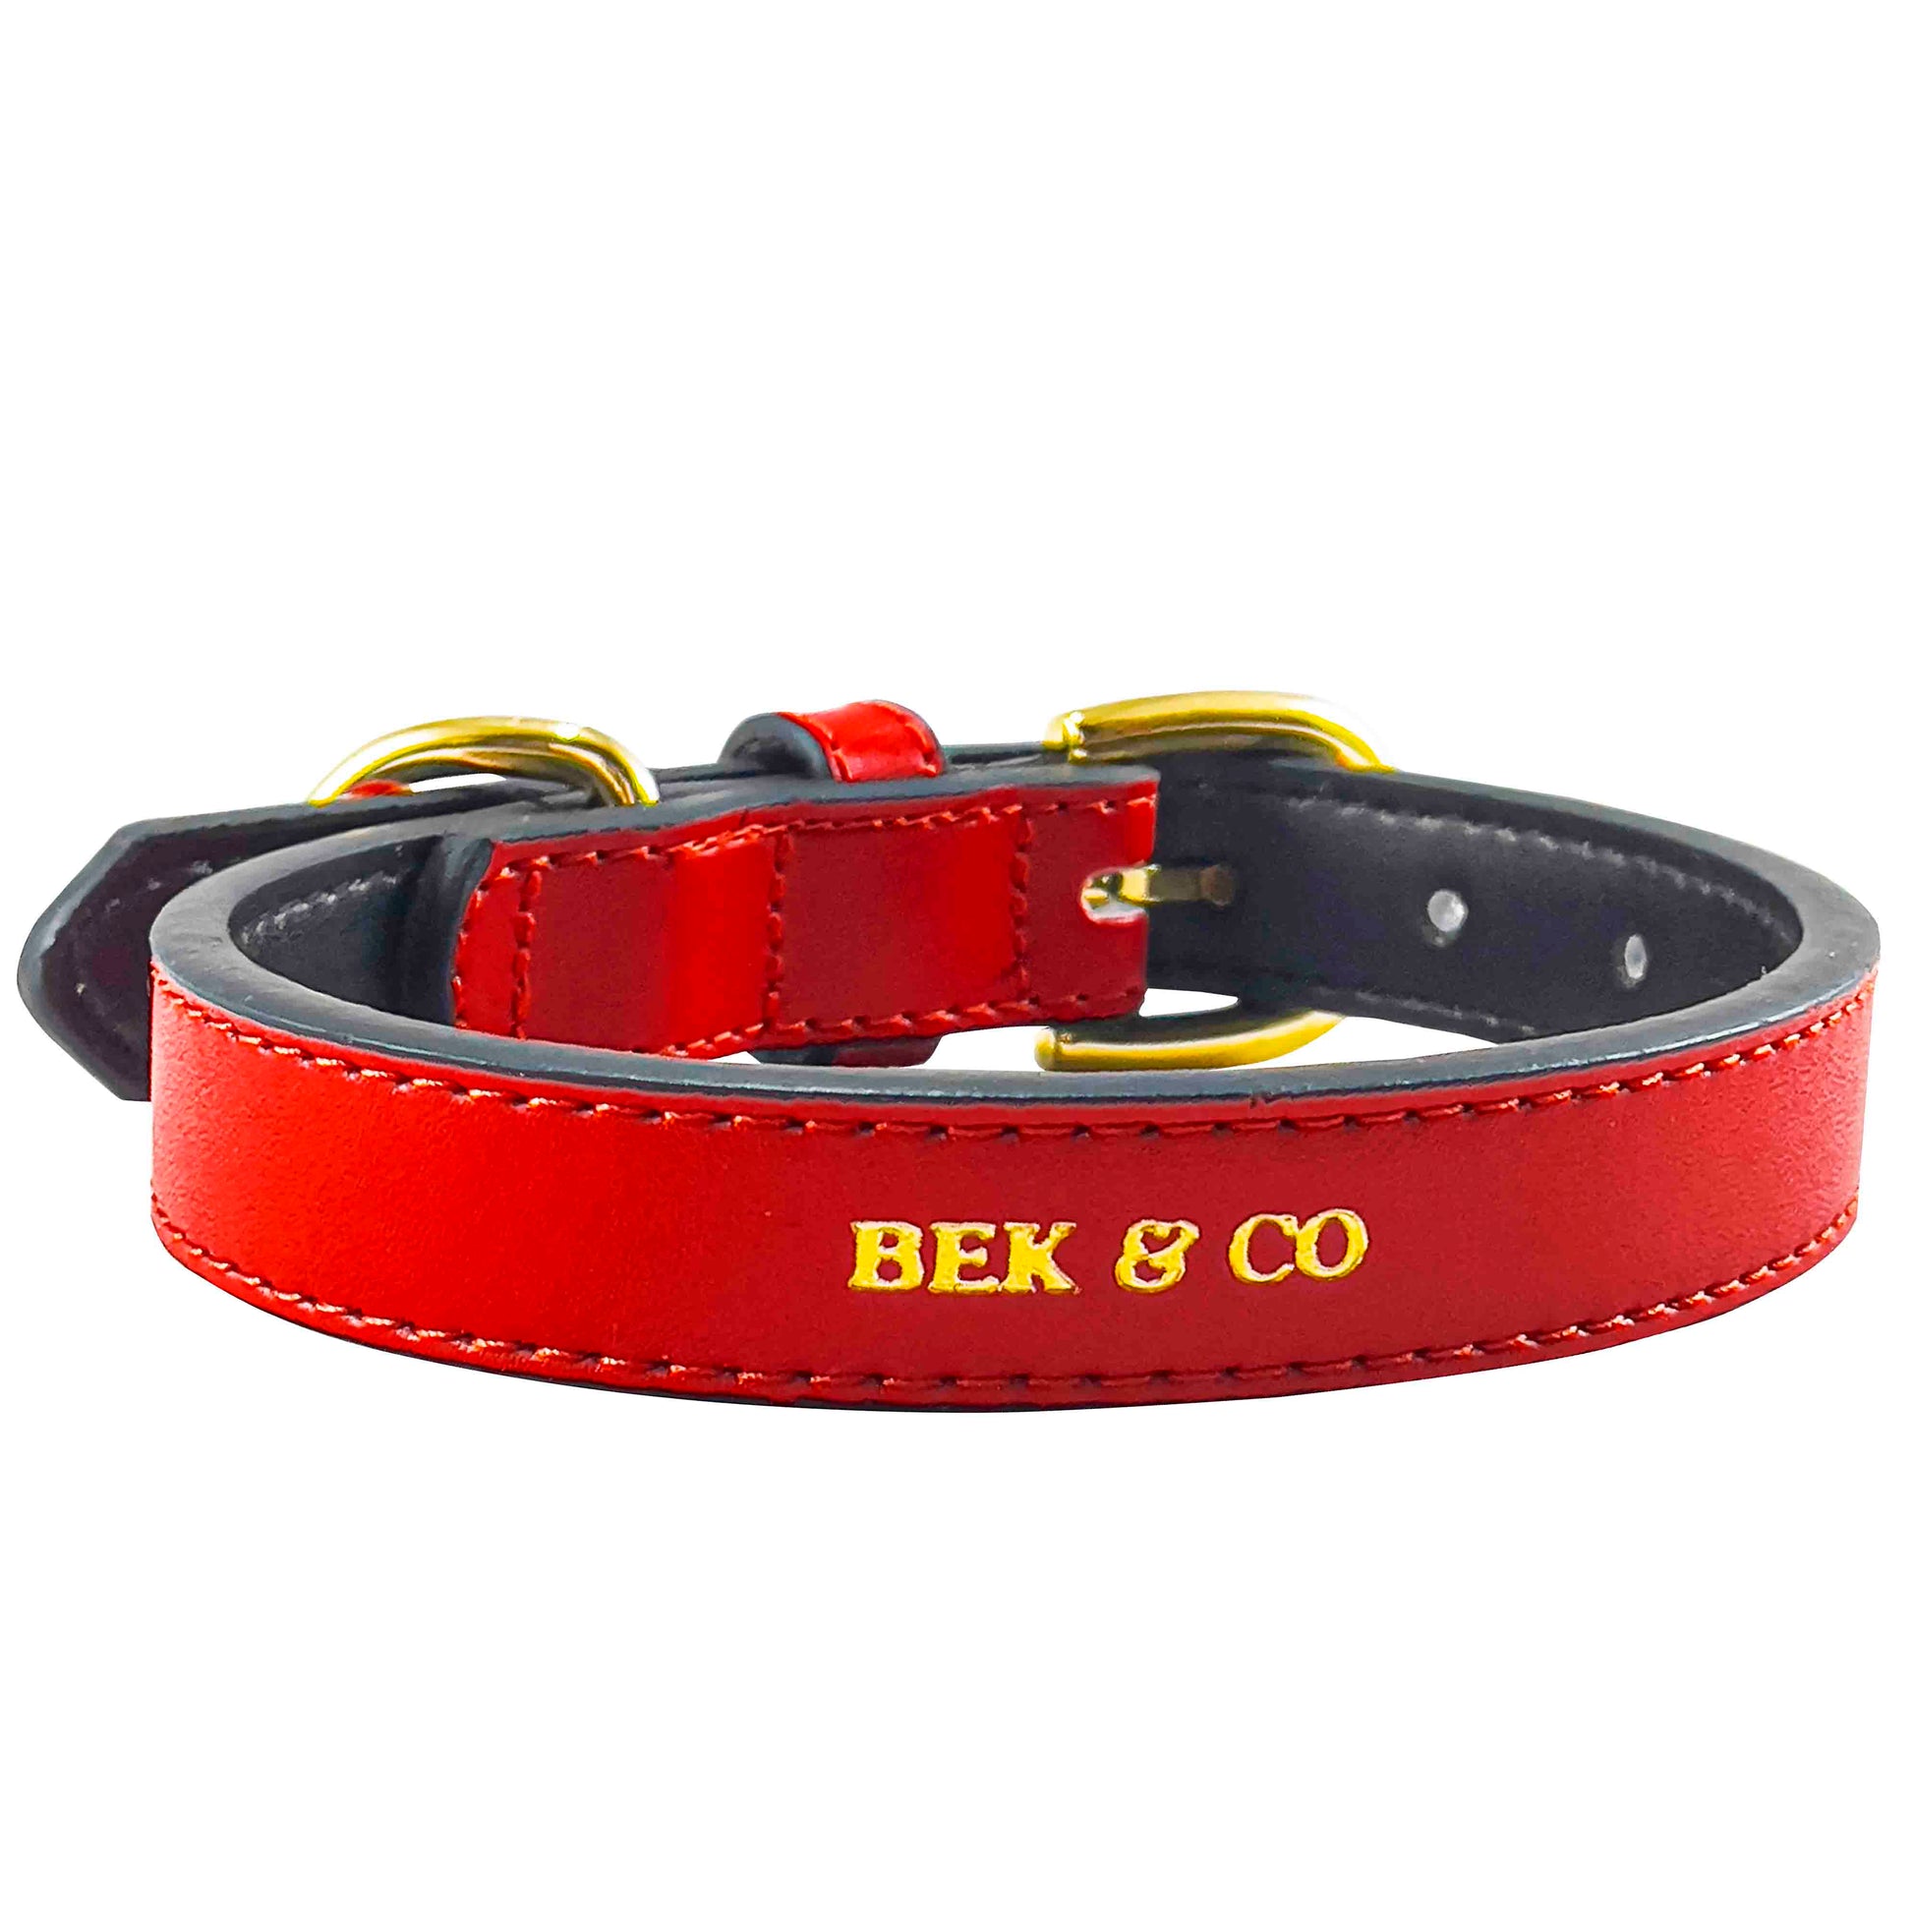 Bek & Co Regal Red Leather French Bulldog collar on white background showing gold embossed logo